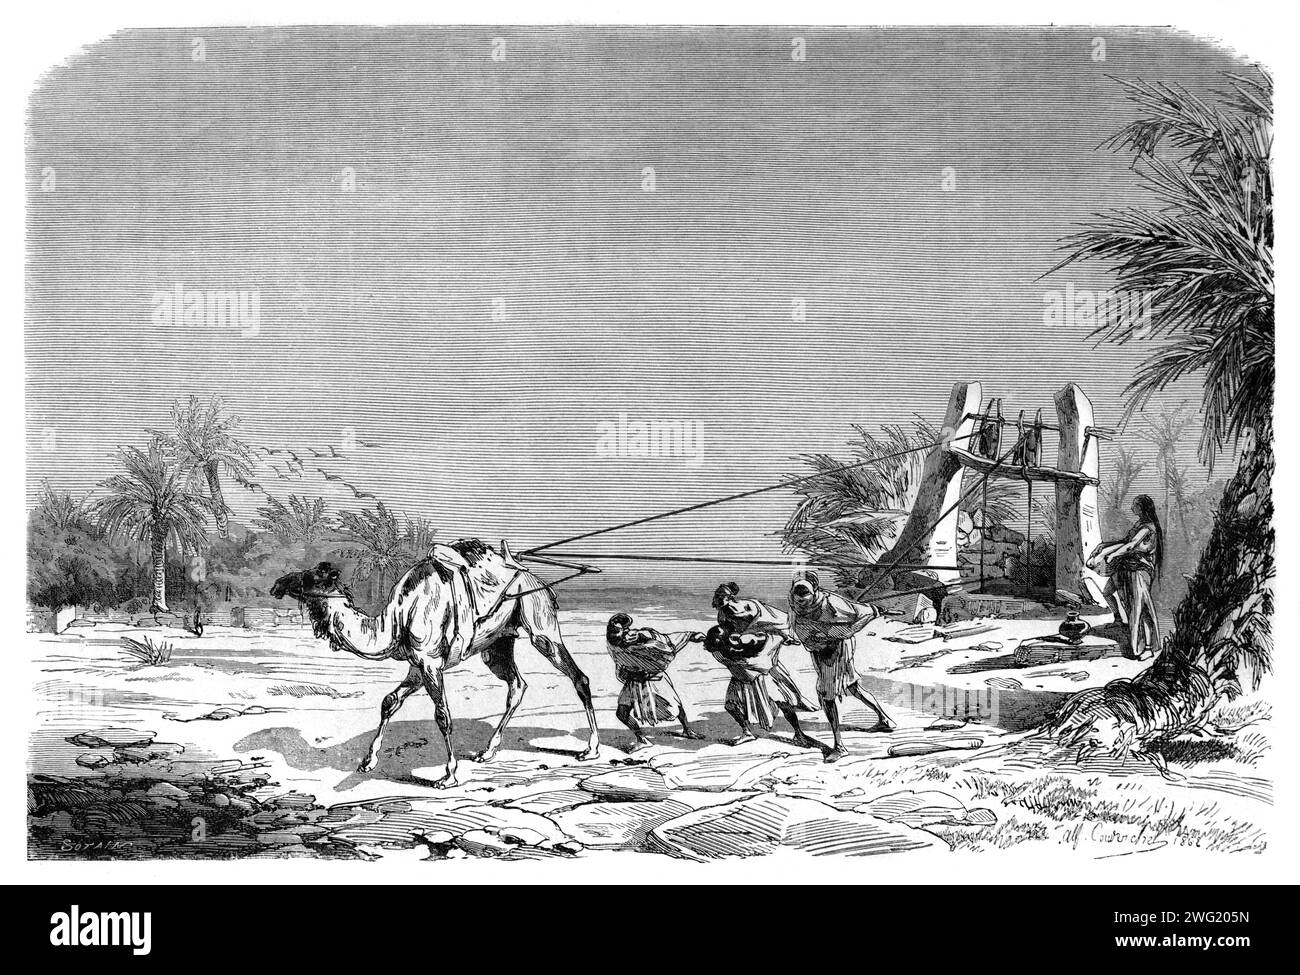 Cammello Powered Water Well, o Camel Drawing Water from a Well, a Metlili, Algeria. Incisione vintage o storica o illustrazione 1863 Foto Stock